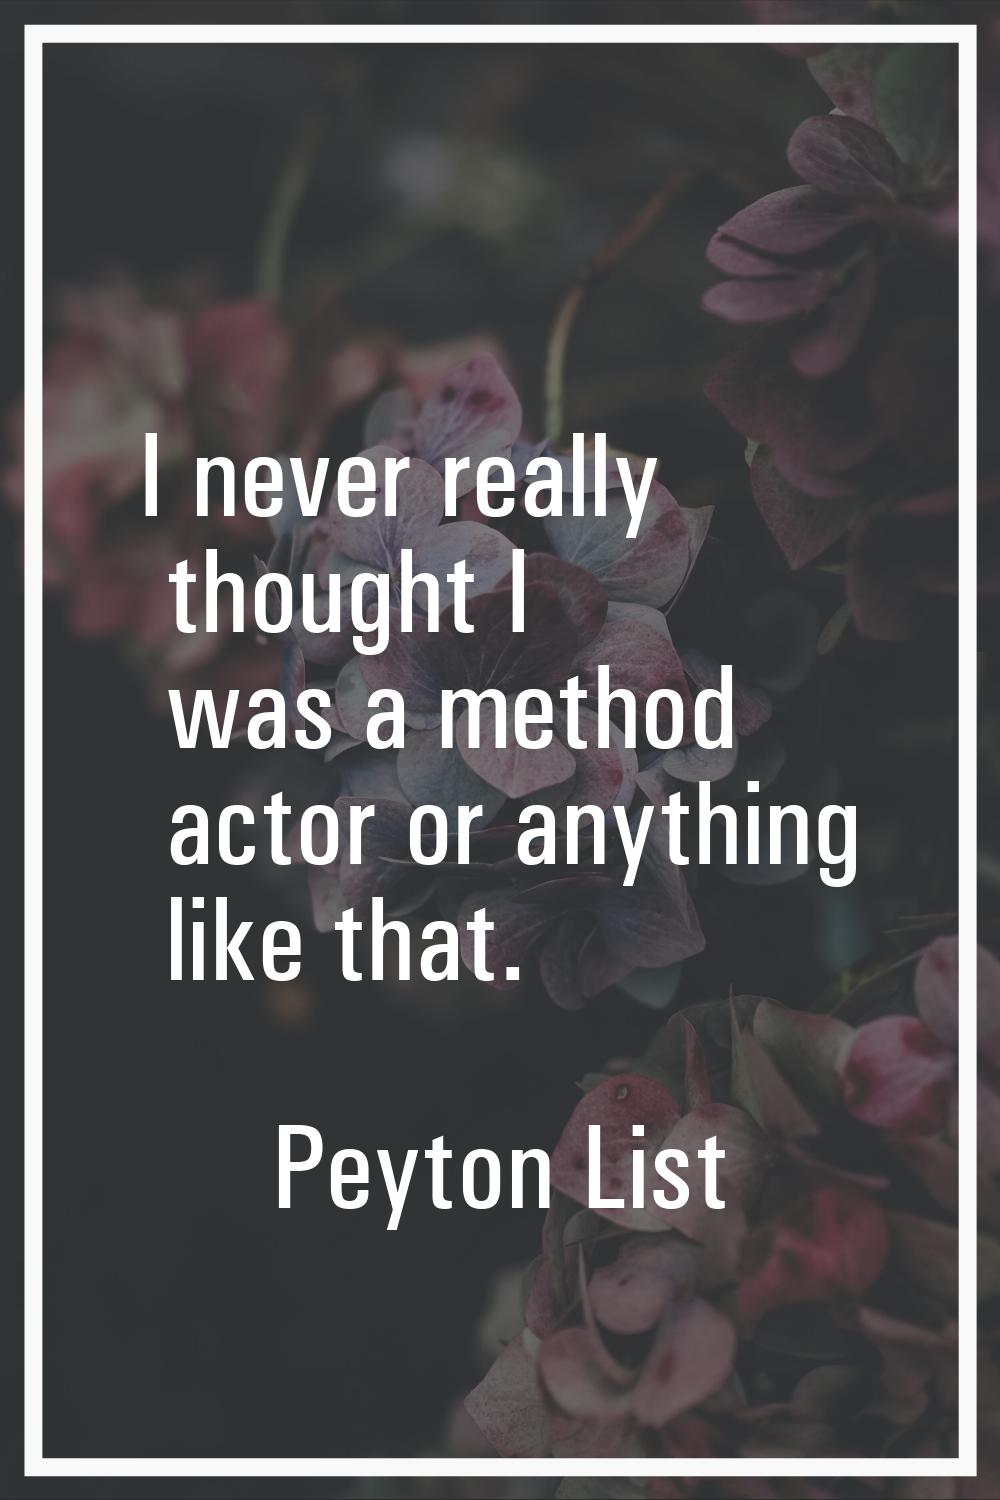 I never really thought I was a method actor or anything like that.